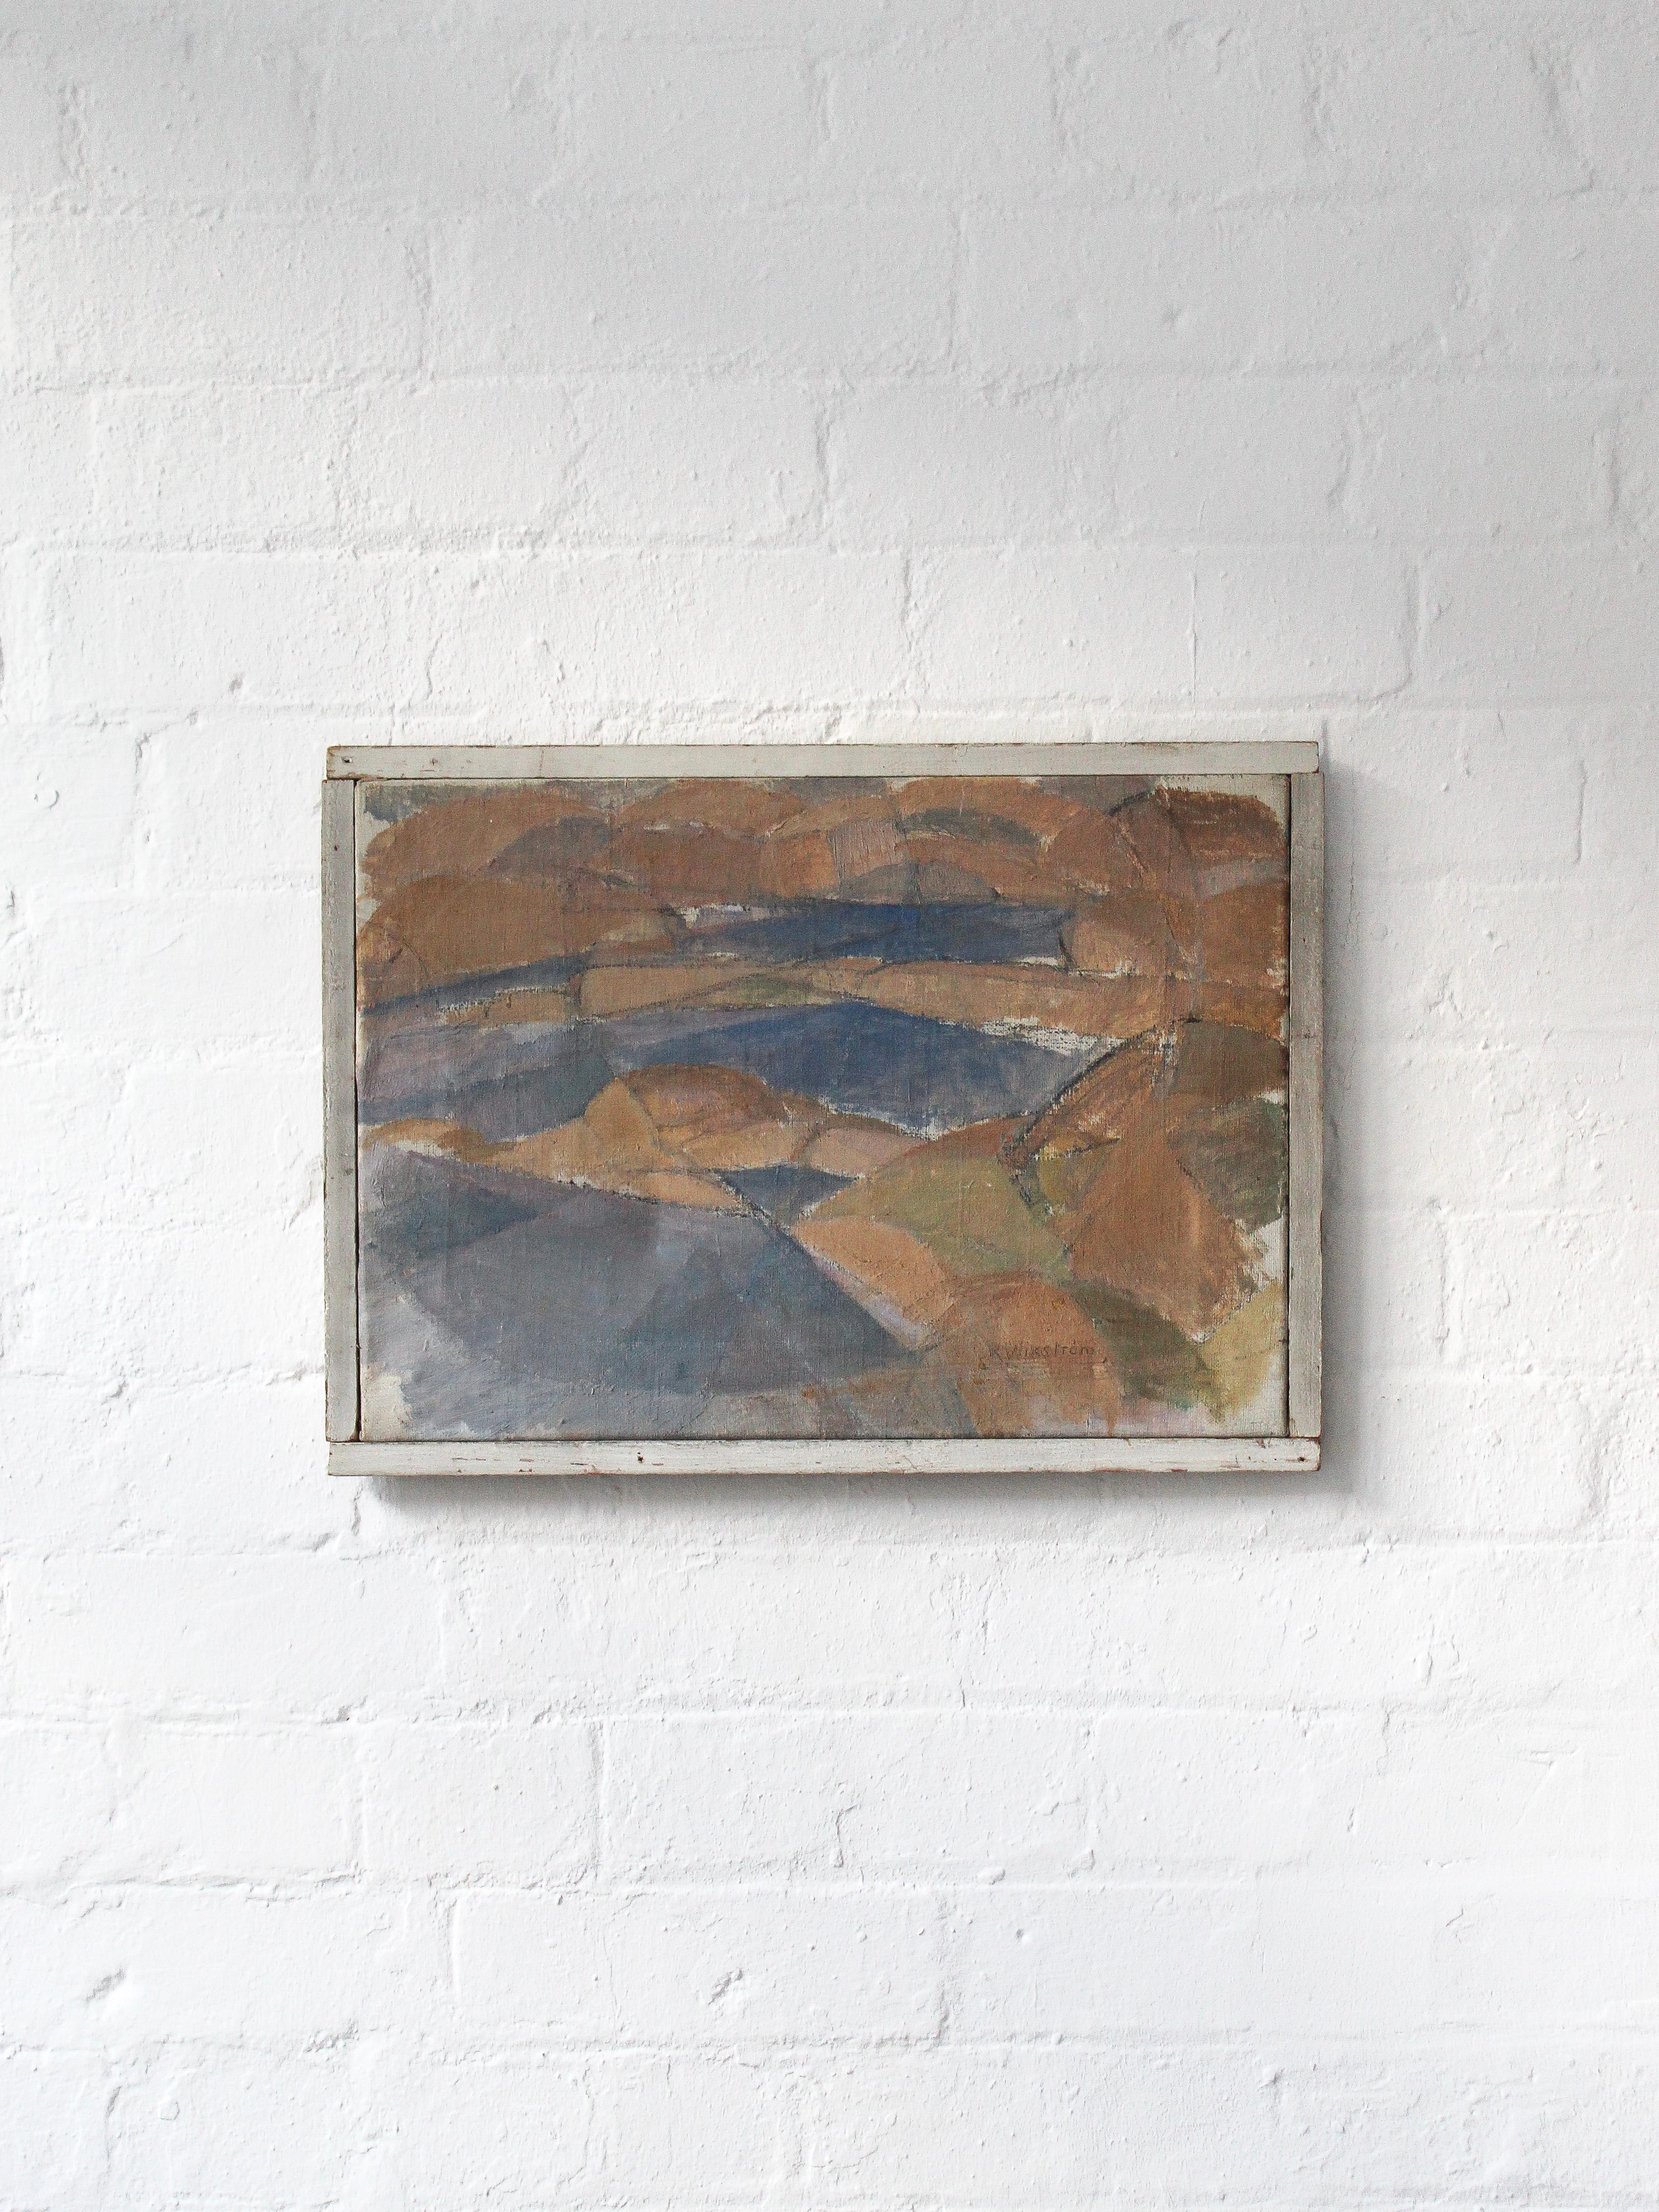 A striking mid-century abstract landscape composition painted in oil onto canvas and framed in a basic painted pine canvas box frame. Swedish in origin, signed by the artist Reinar Wikström to the lower right.

Artist: Reinar Wikström
Medium: Oil on